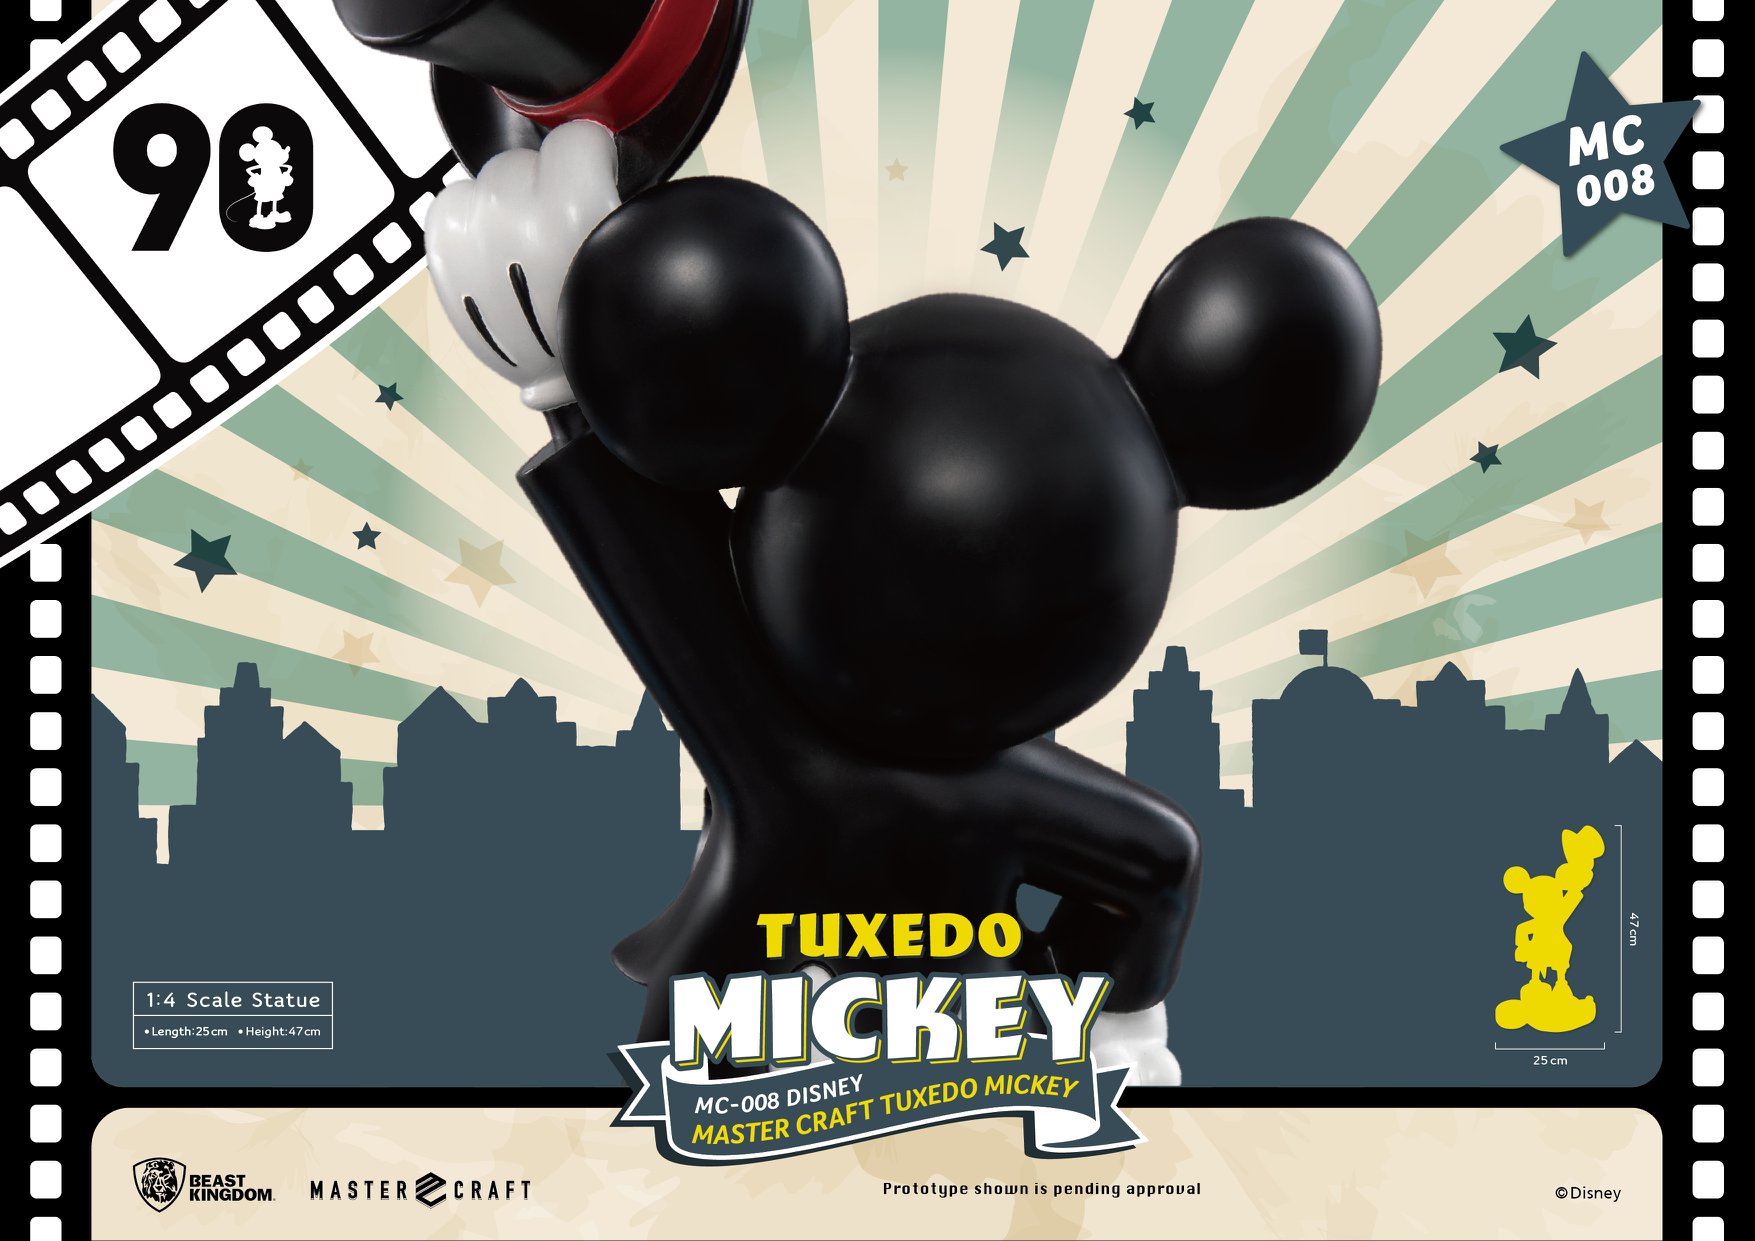 008 Disney Master Craft Tuxedo Mickey Mouse statue, which is being released...